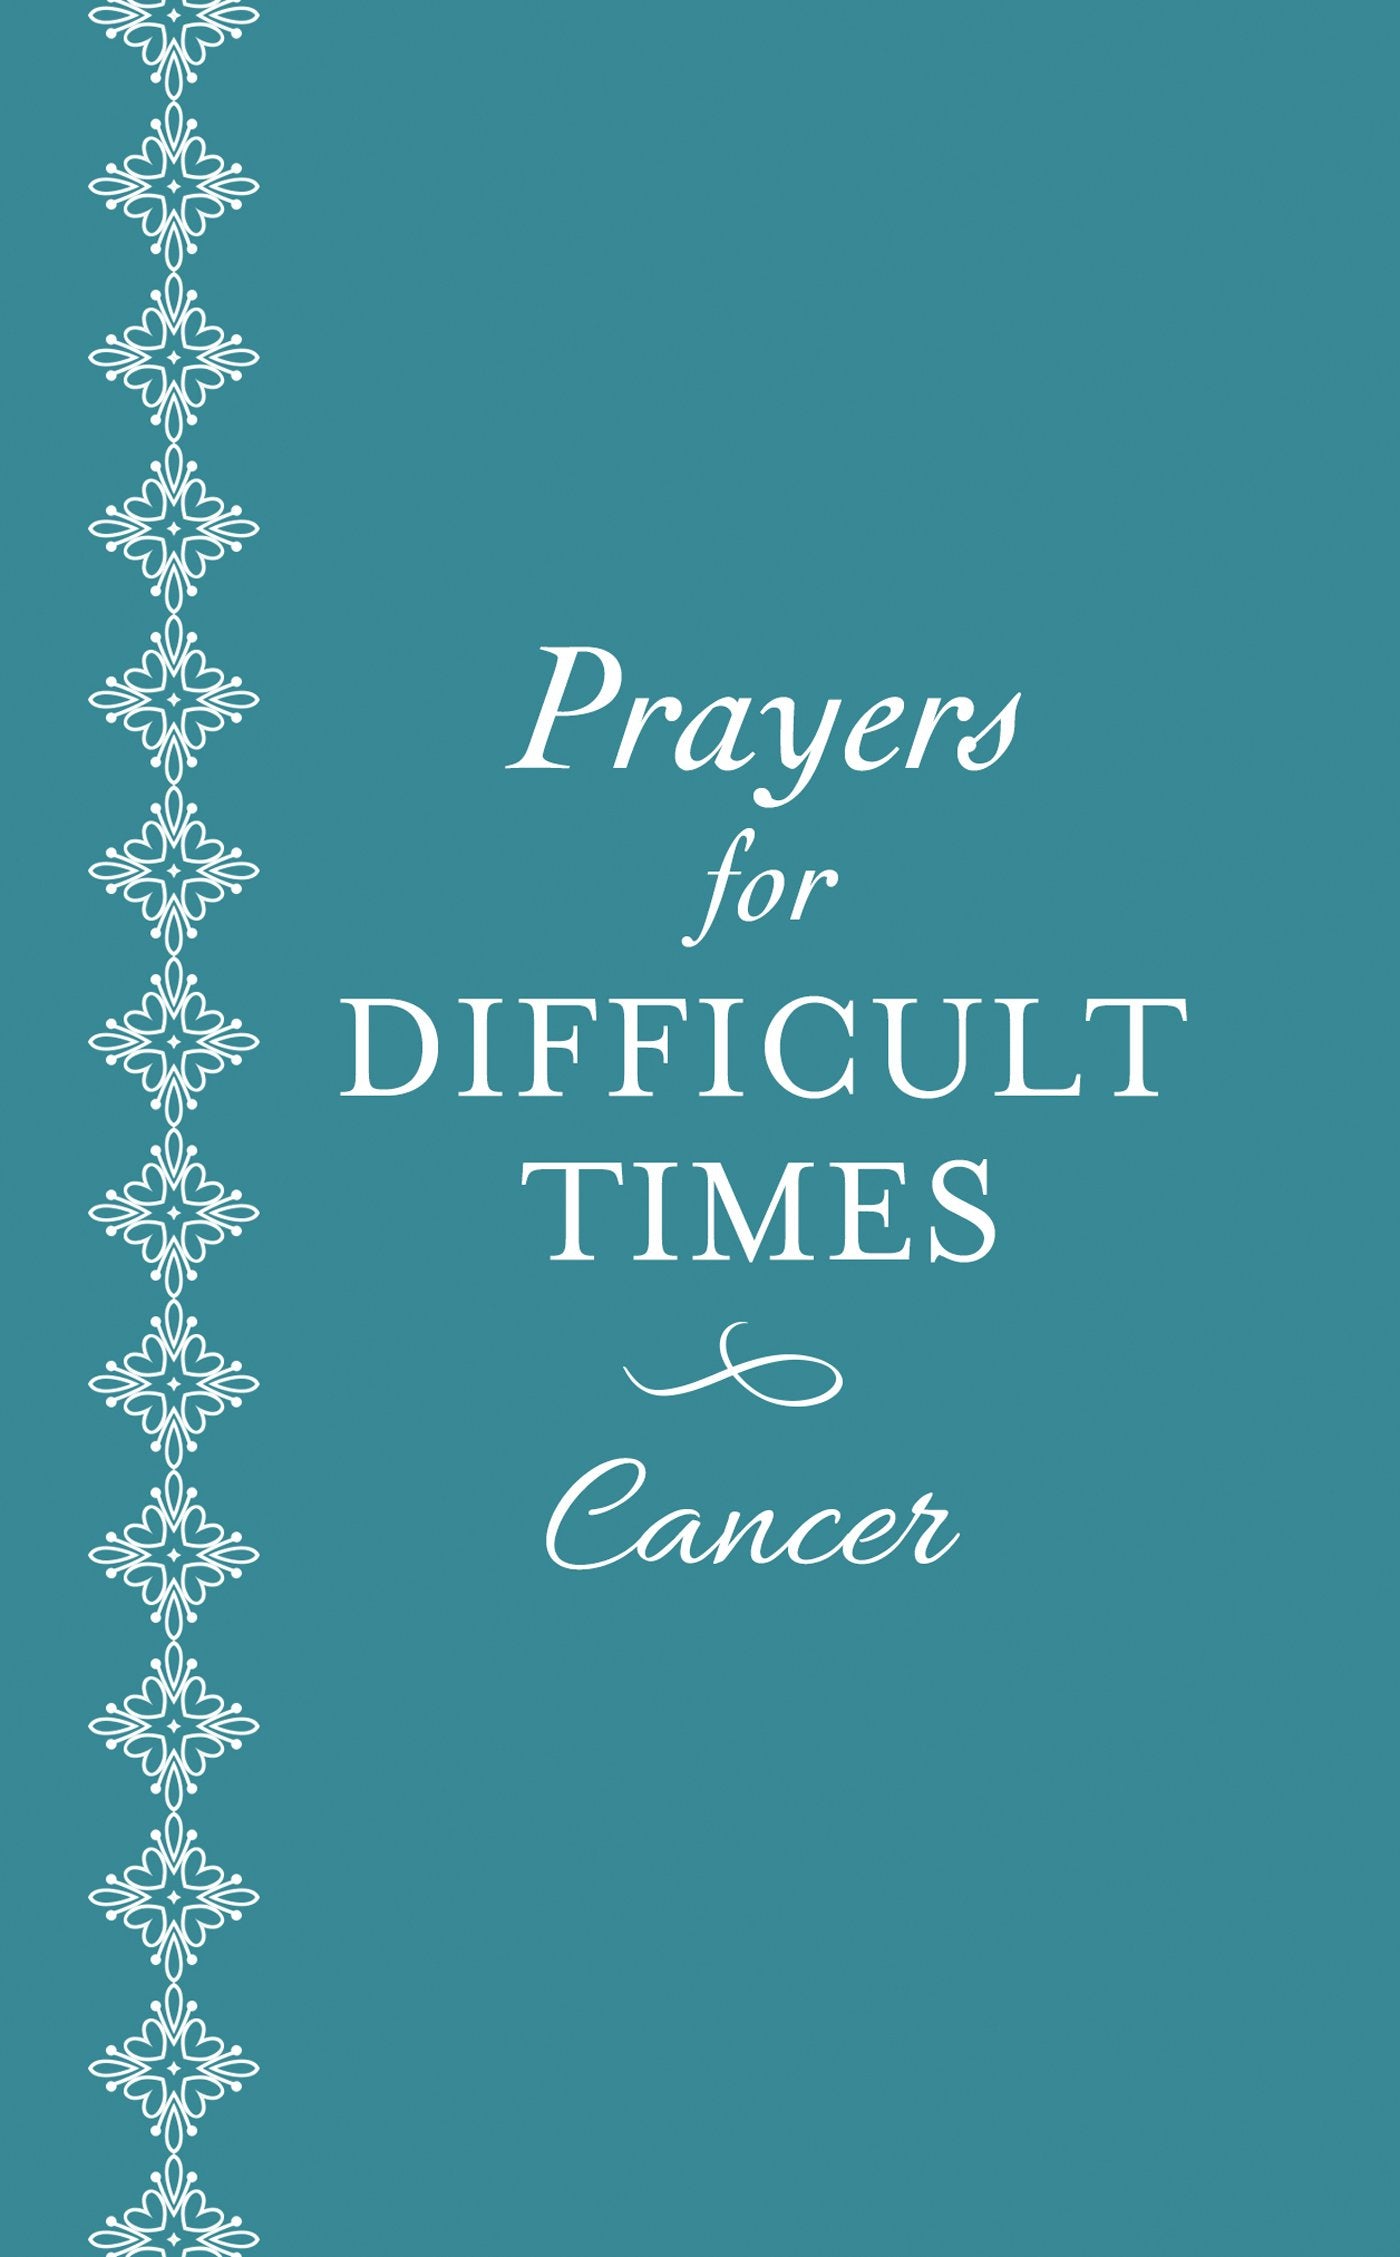 Prayers for Difficult Times - Cancer